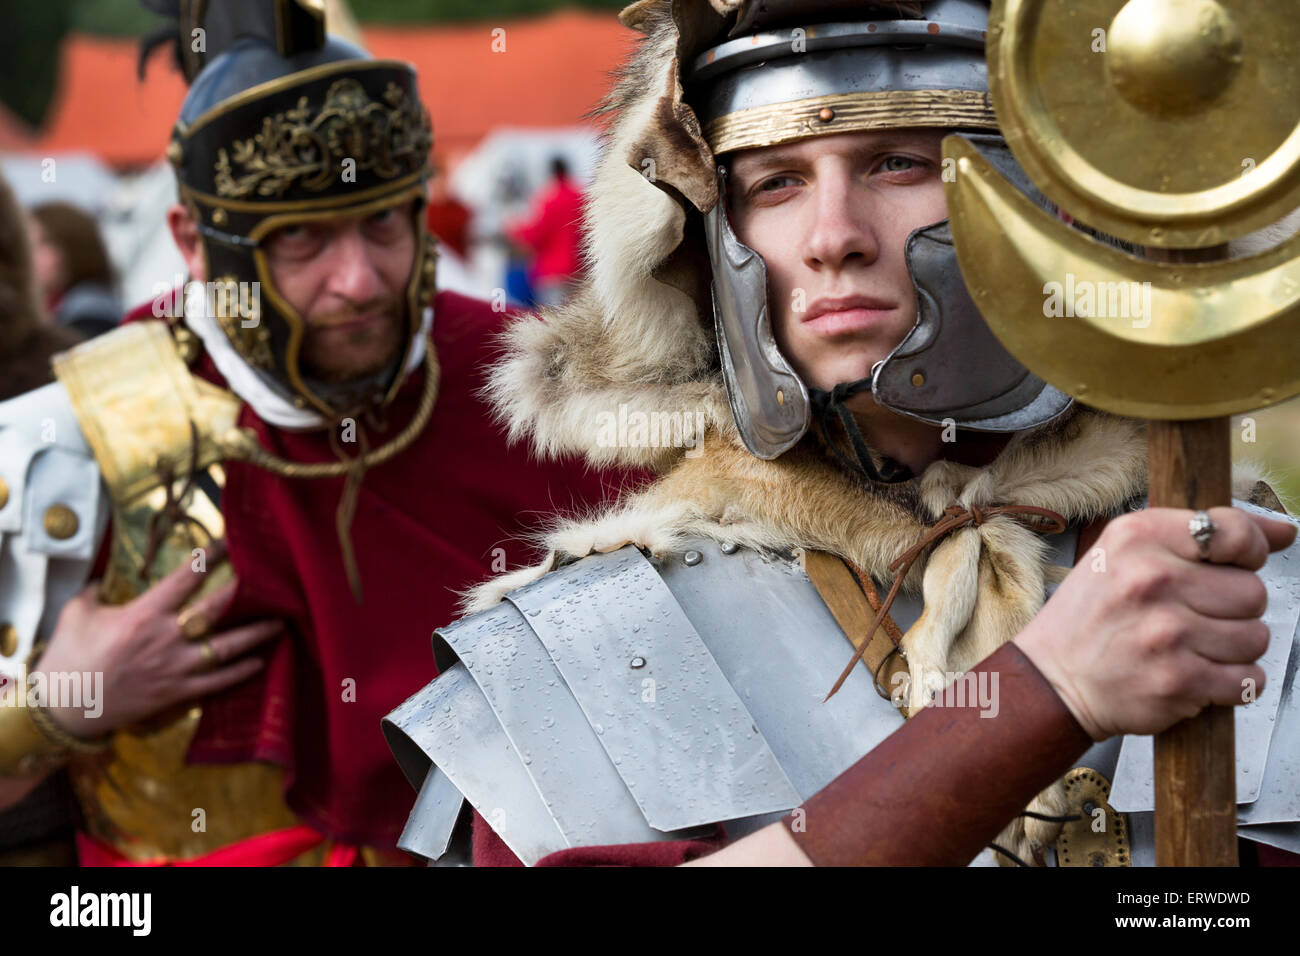 Moscow, Russia. 5th June, 2015. Participants of The 5th Times and Epochs festival - Ancient Rome at the Kolomenskoye Park in Moscow, Russia Stock Photo